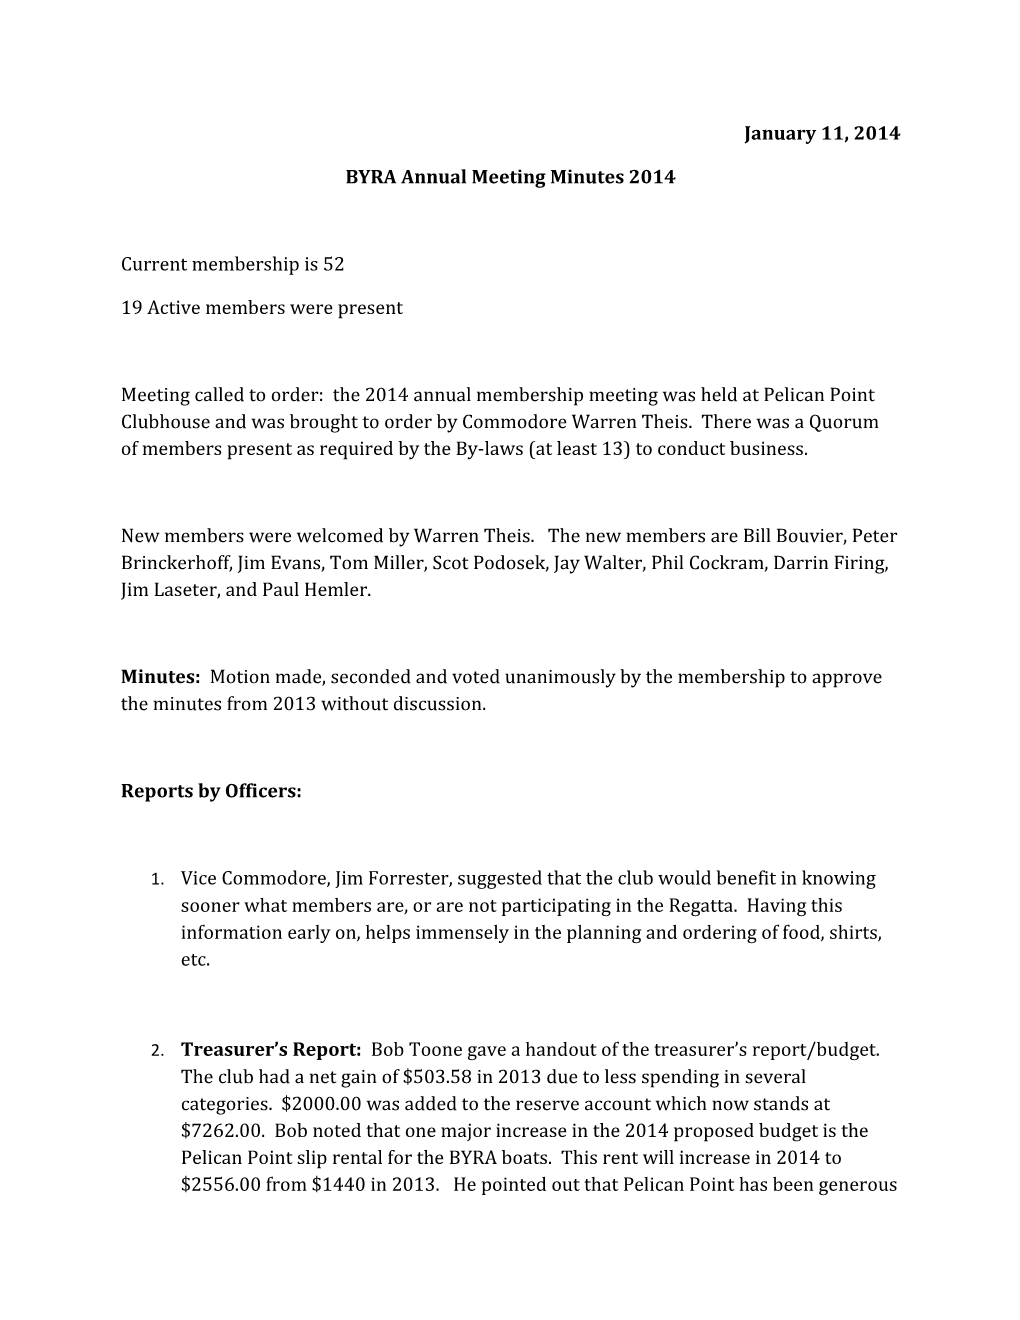 BYRA Annual Meeting Minutes 2014